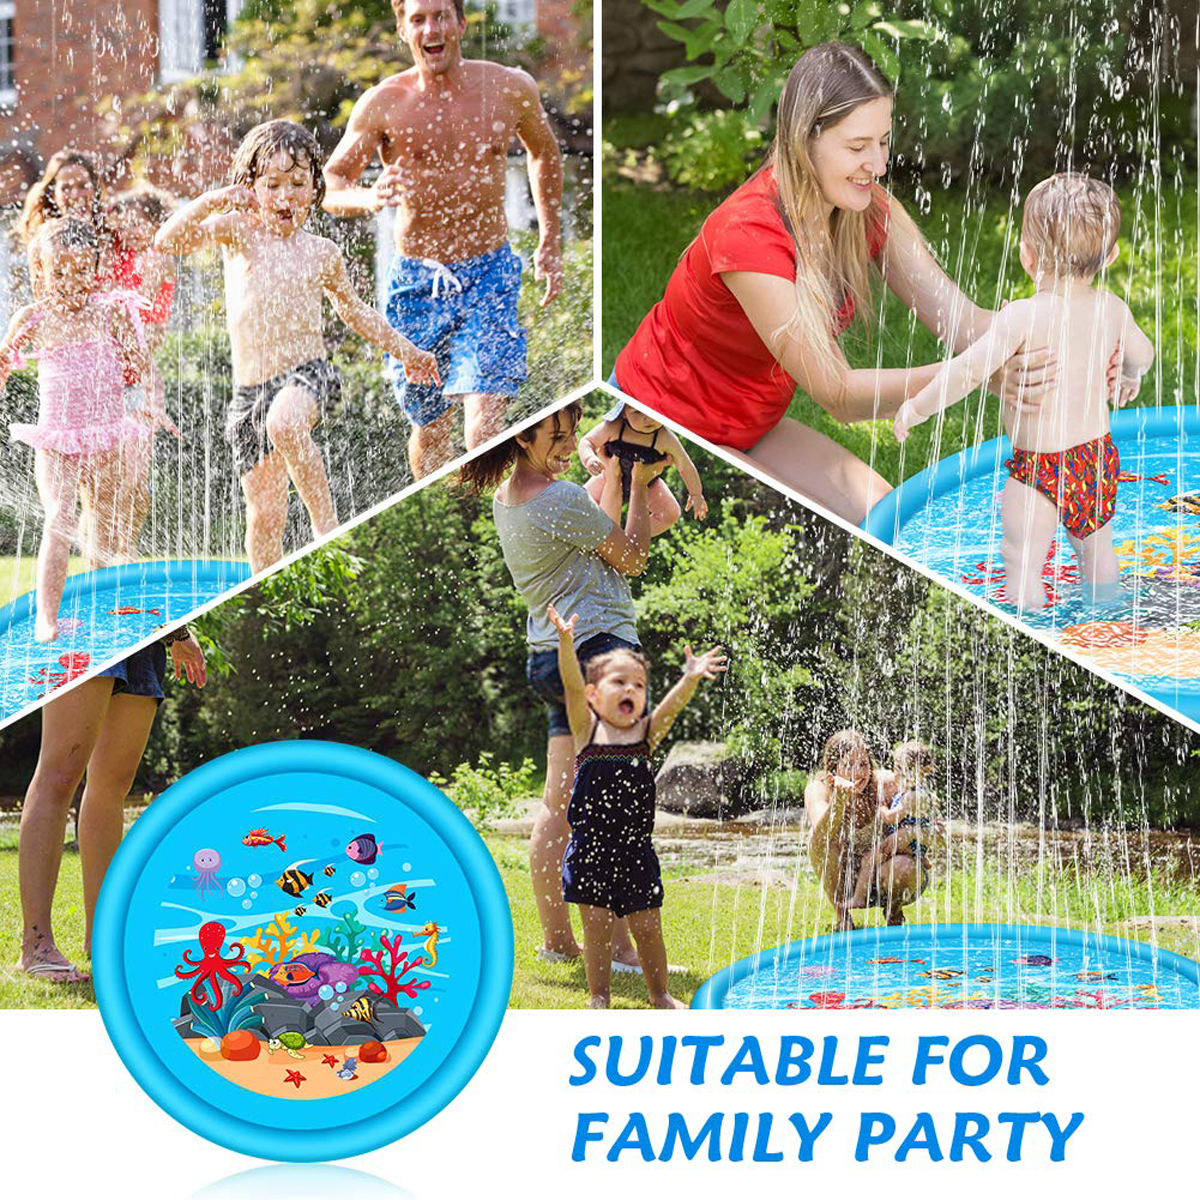 67inch Splash Water Play Mat Sprinkle Splash Play Mat Toy for Outdoor Swimming Beach Lawn Inflatable Sprinkler Pad for Kids